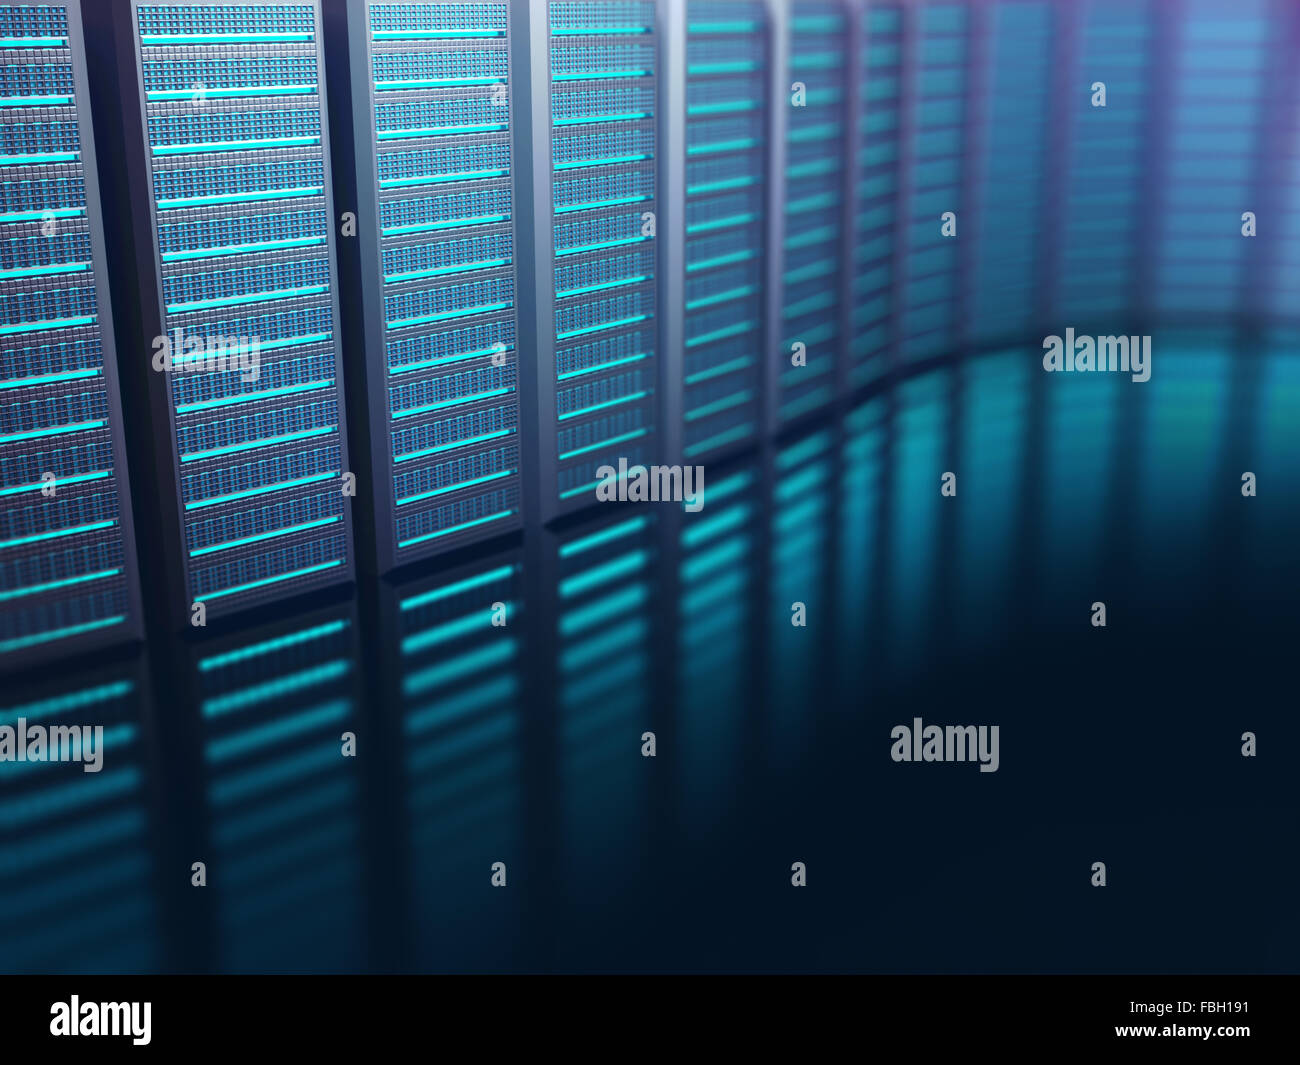 Servers lined up on an abstract background. Abstract image on technology concept. Stock Photo